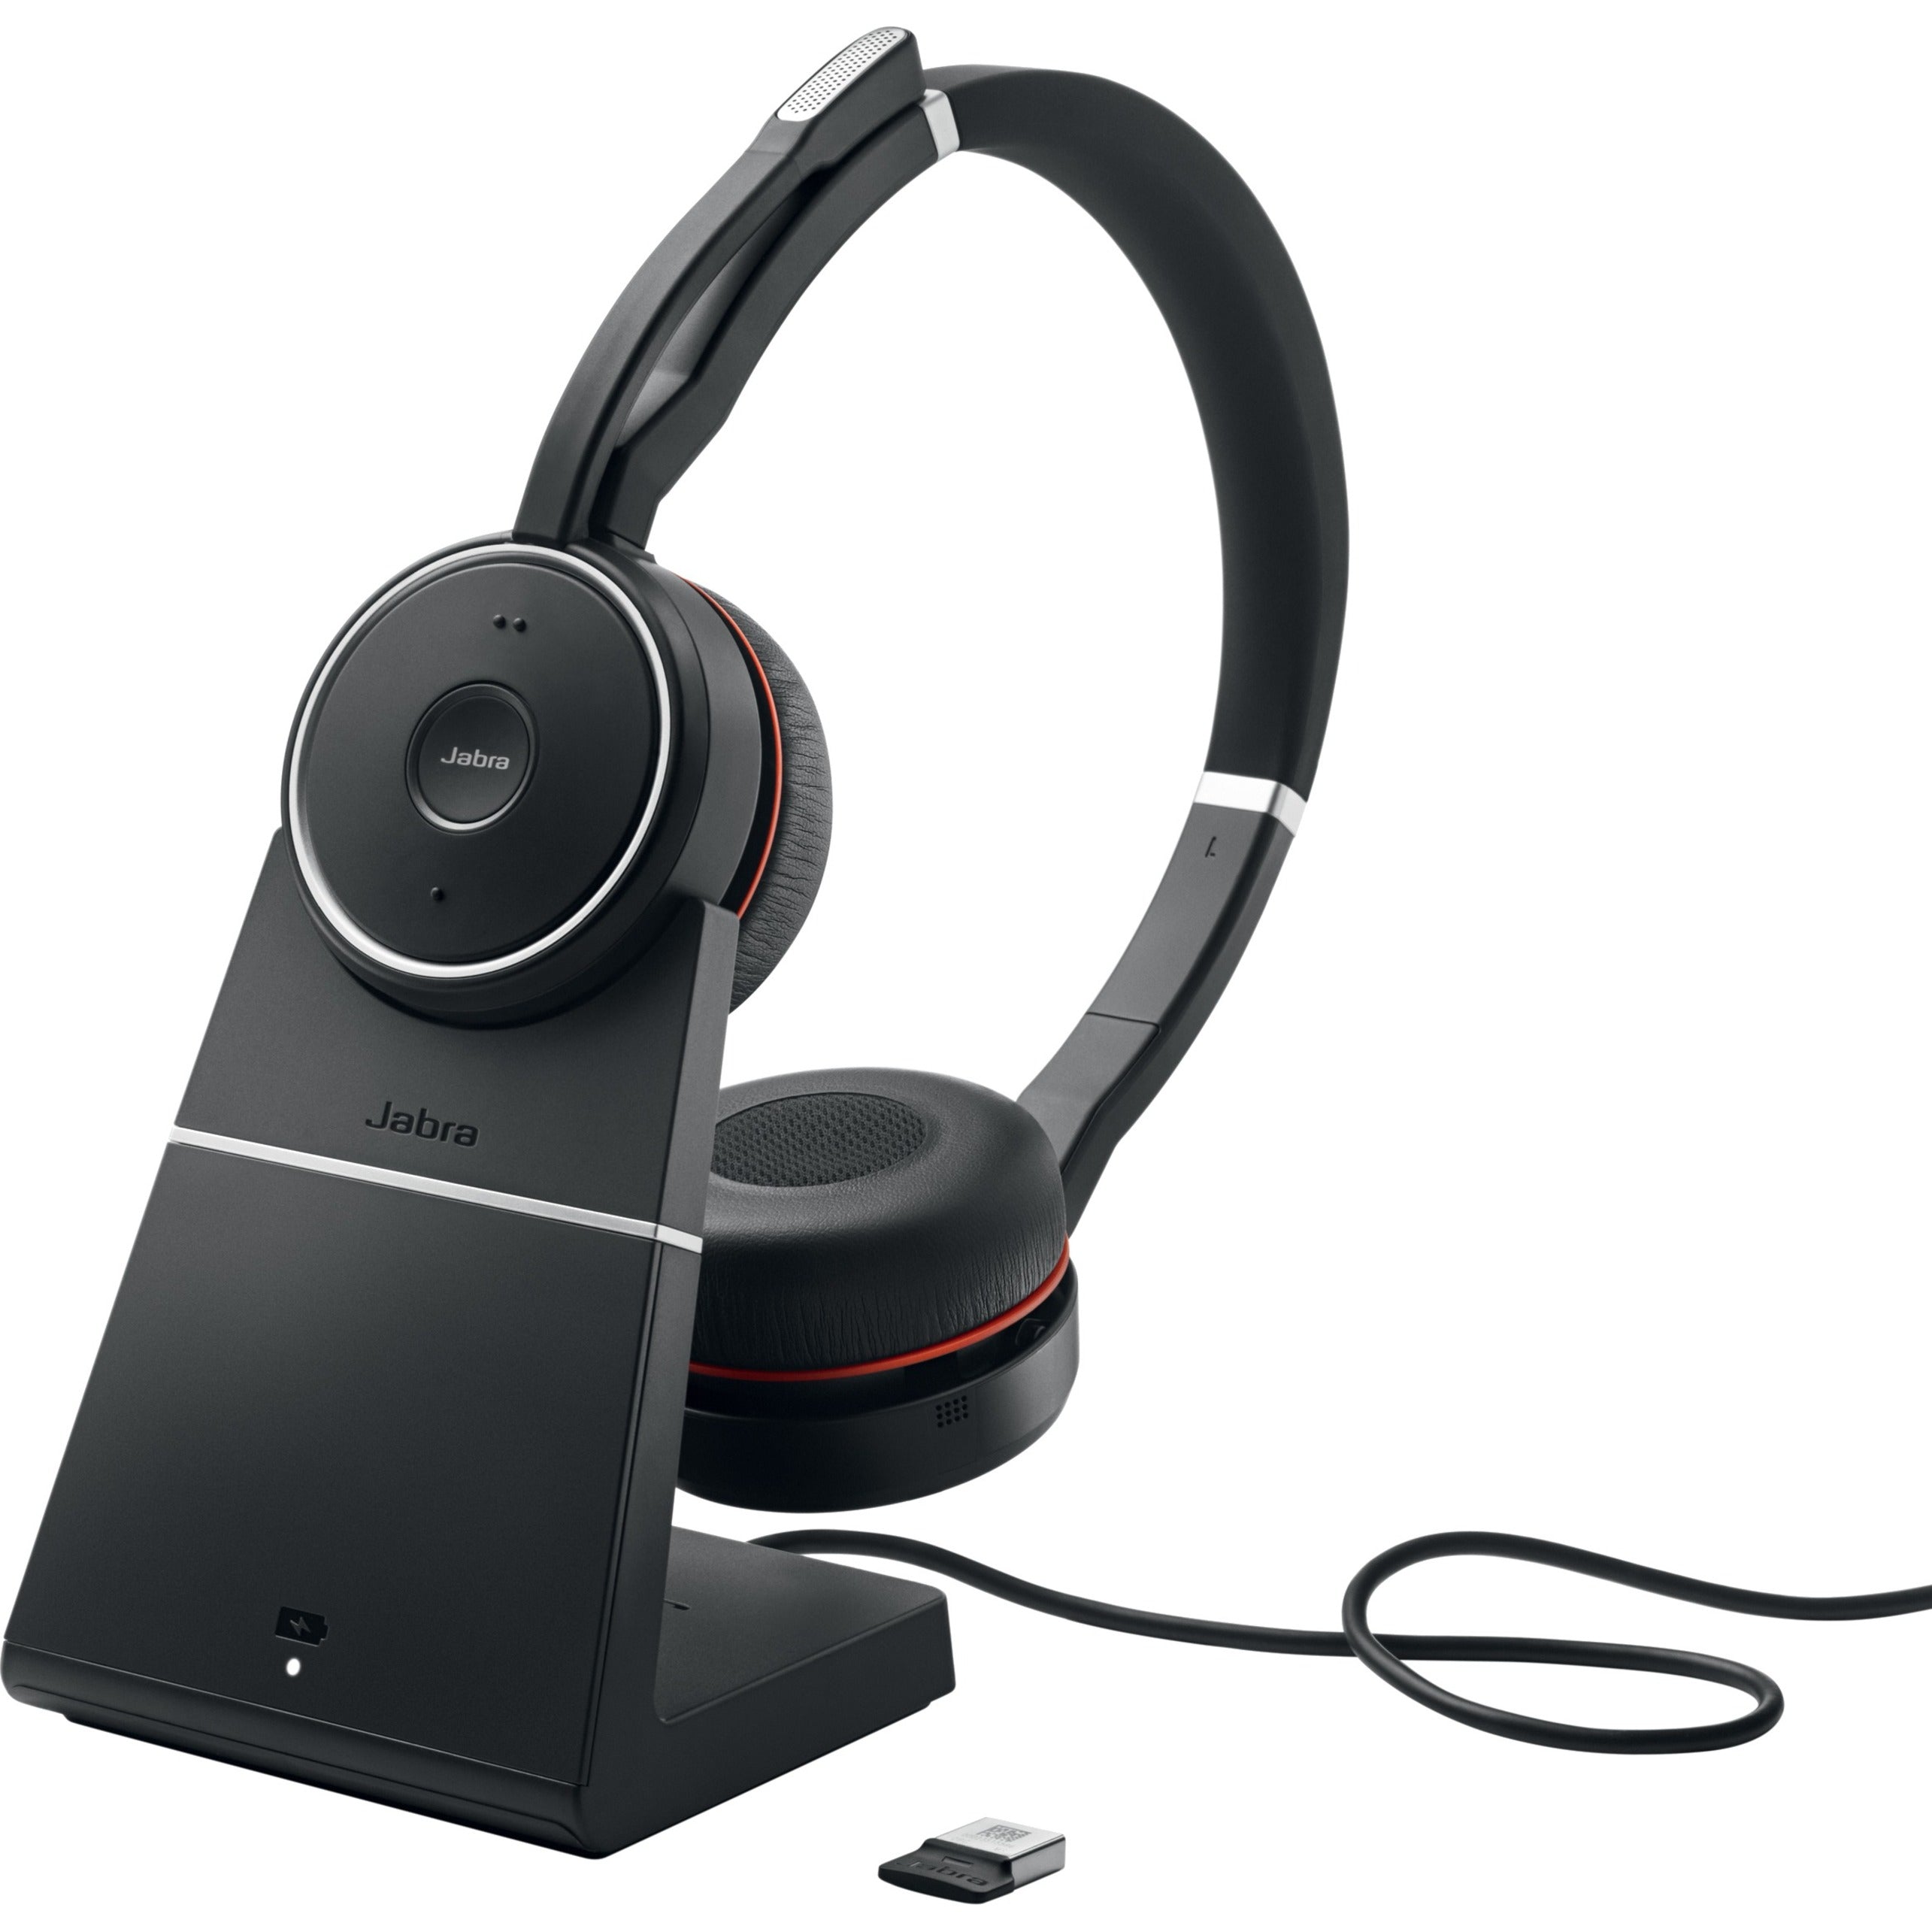 Jabra 7599-838-199 EVOLVE 75 with Charging Stand UC Stereo, Wireless Bluetooth Headset with Noise Canceling